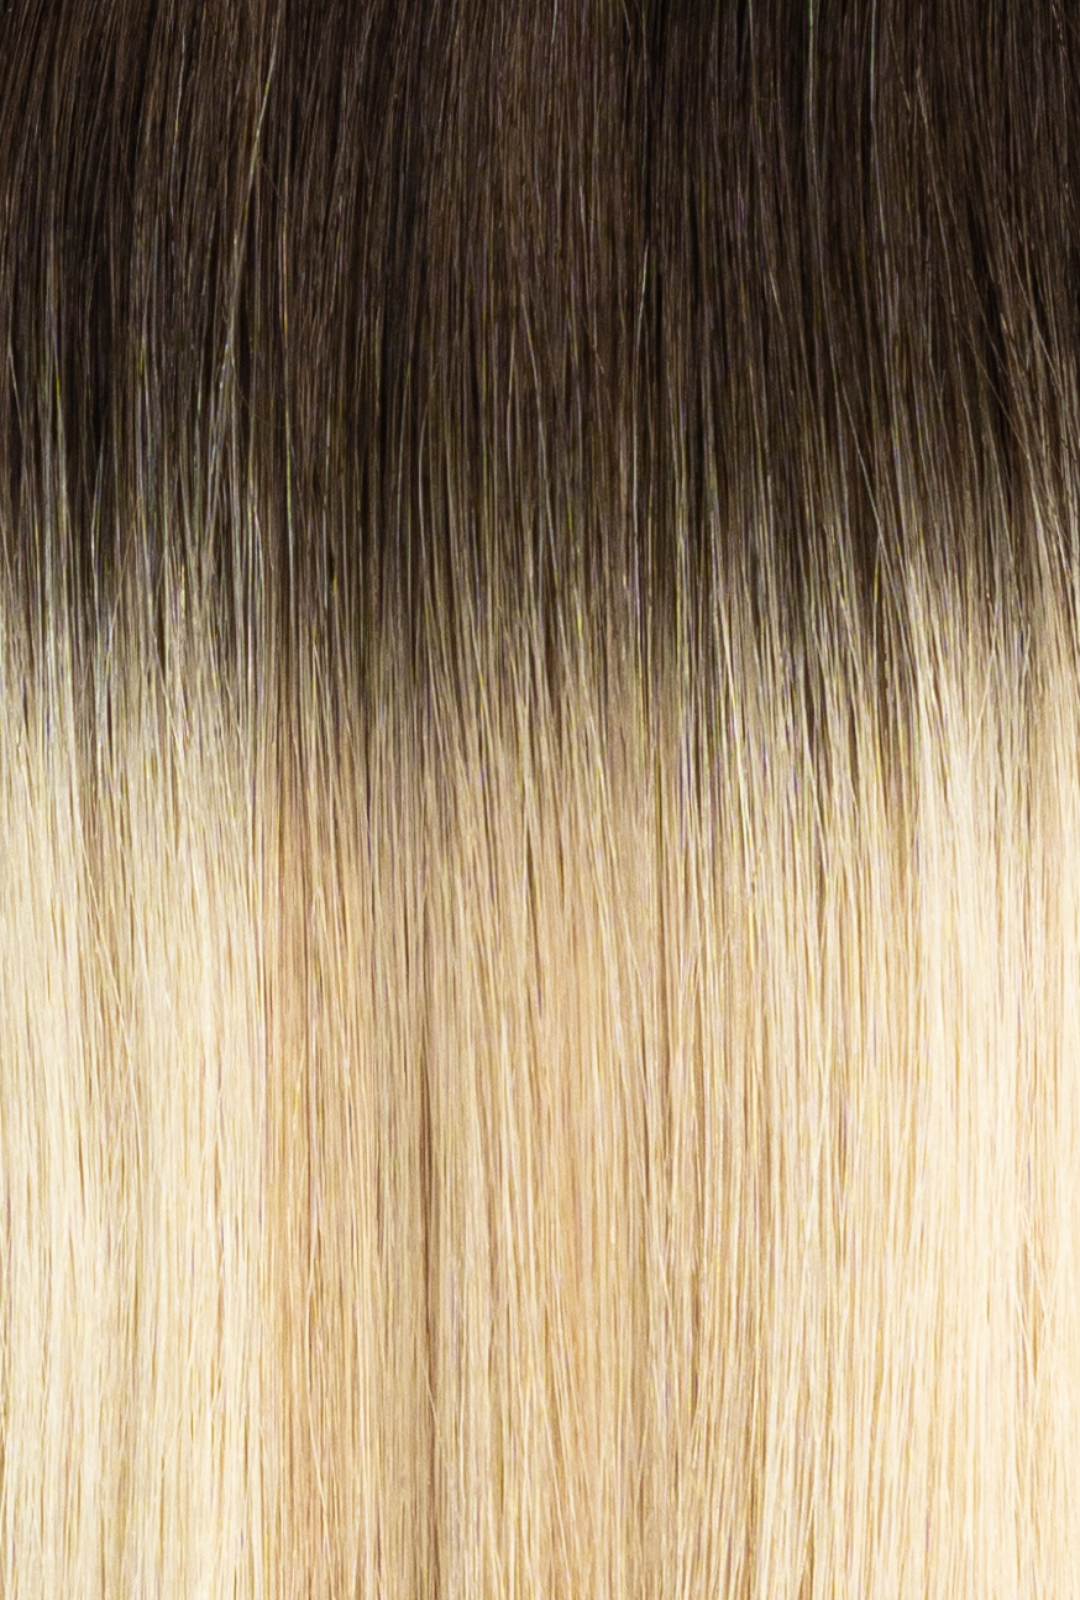 Keratin Bond Rooted #2/D18/22 - Discontinued